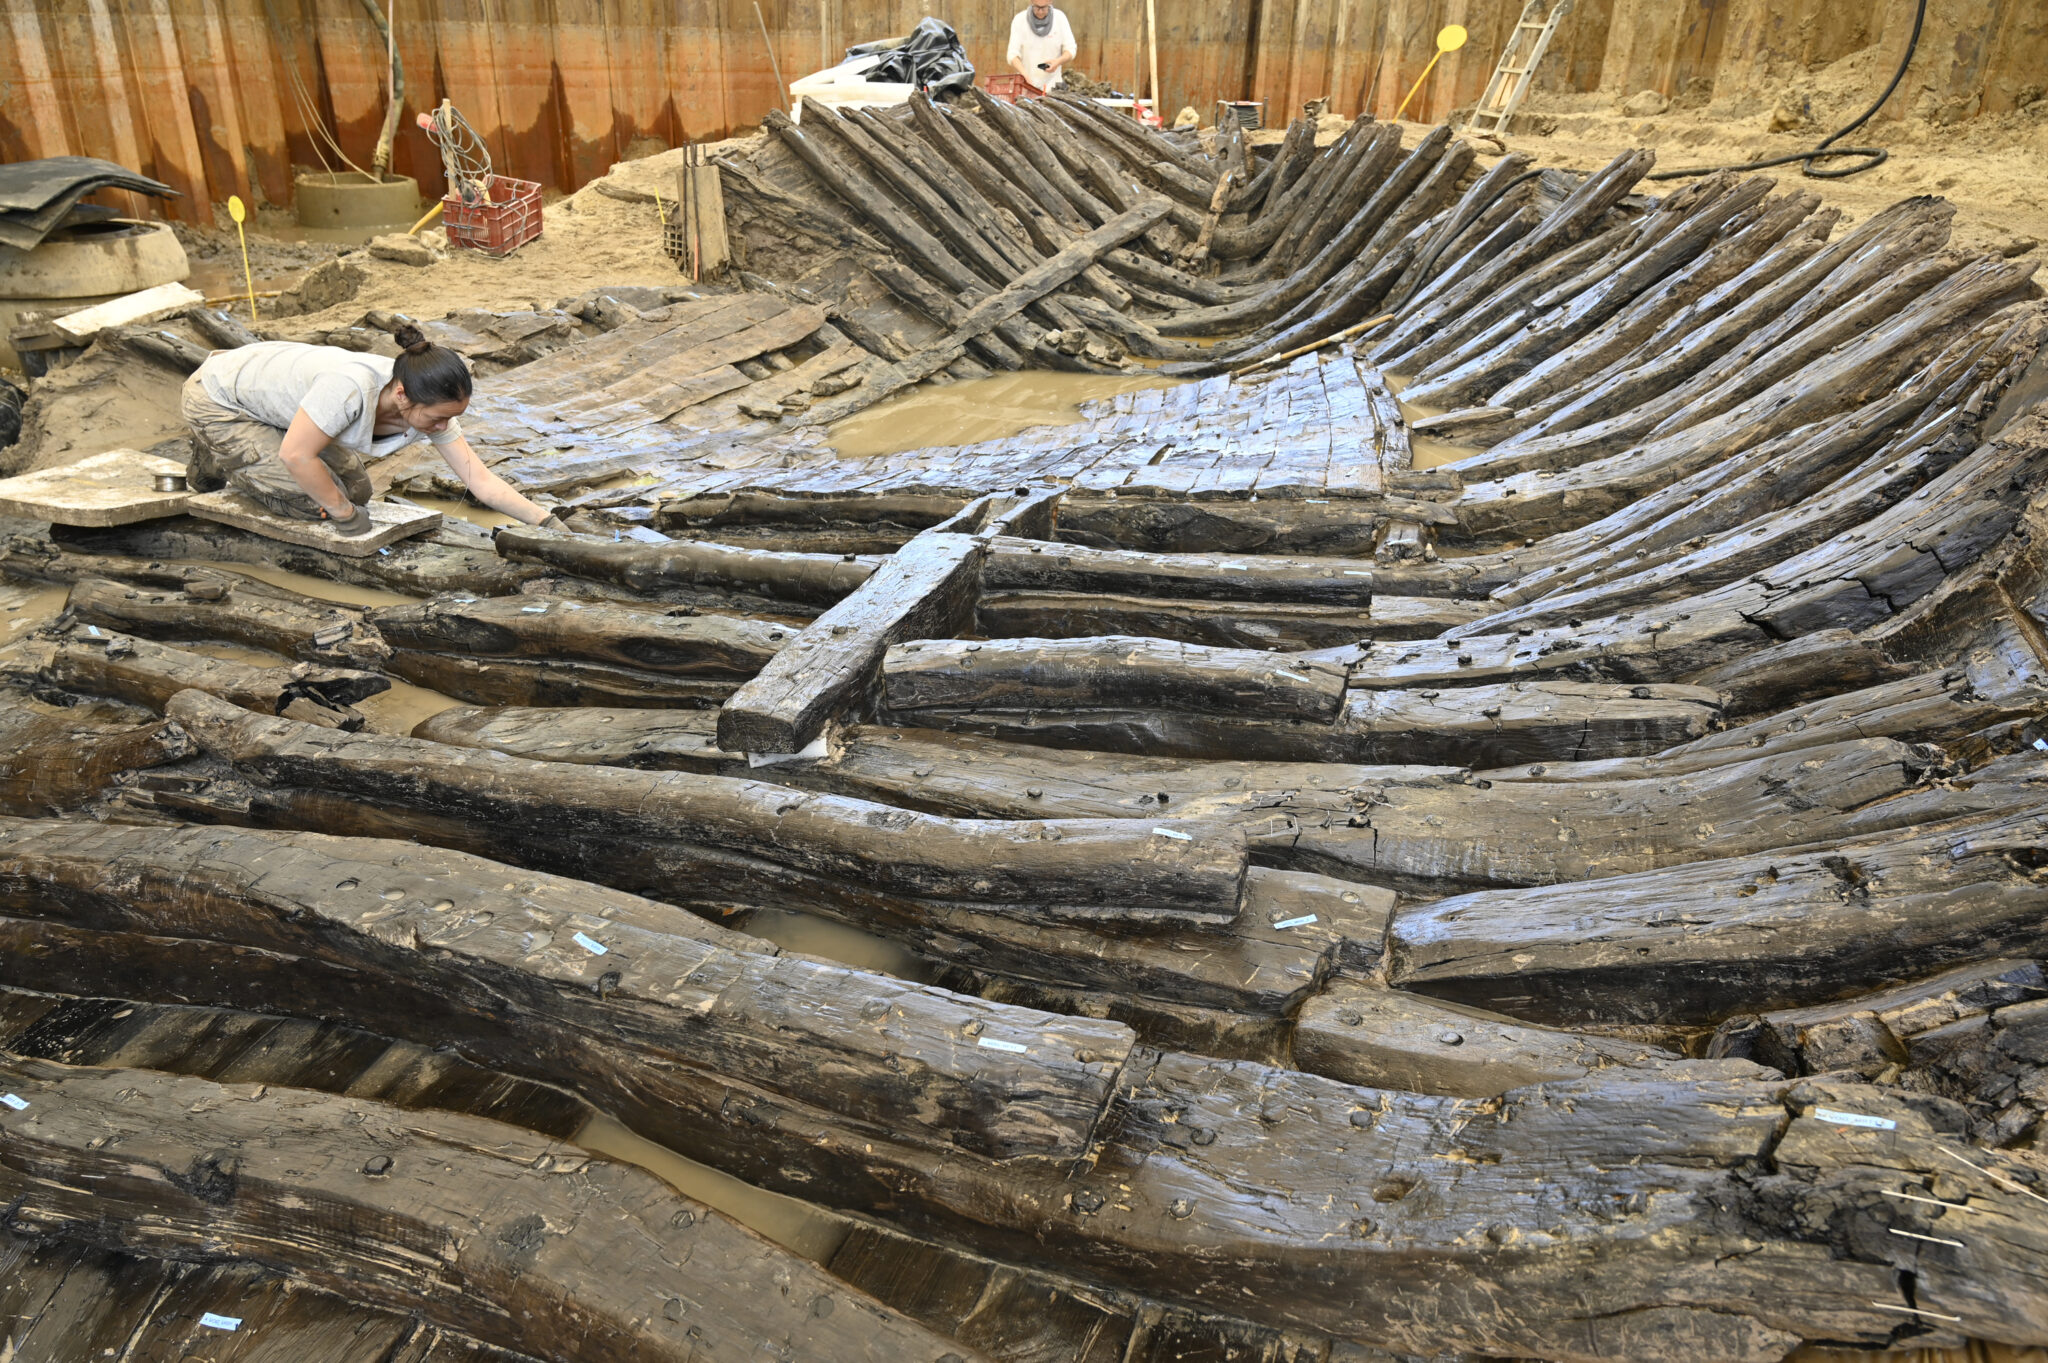 1,300-year-old shipwreck found in France